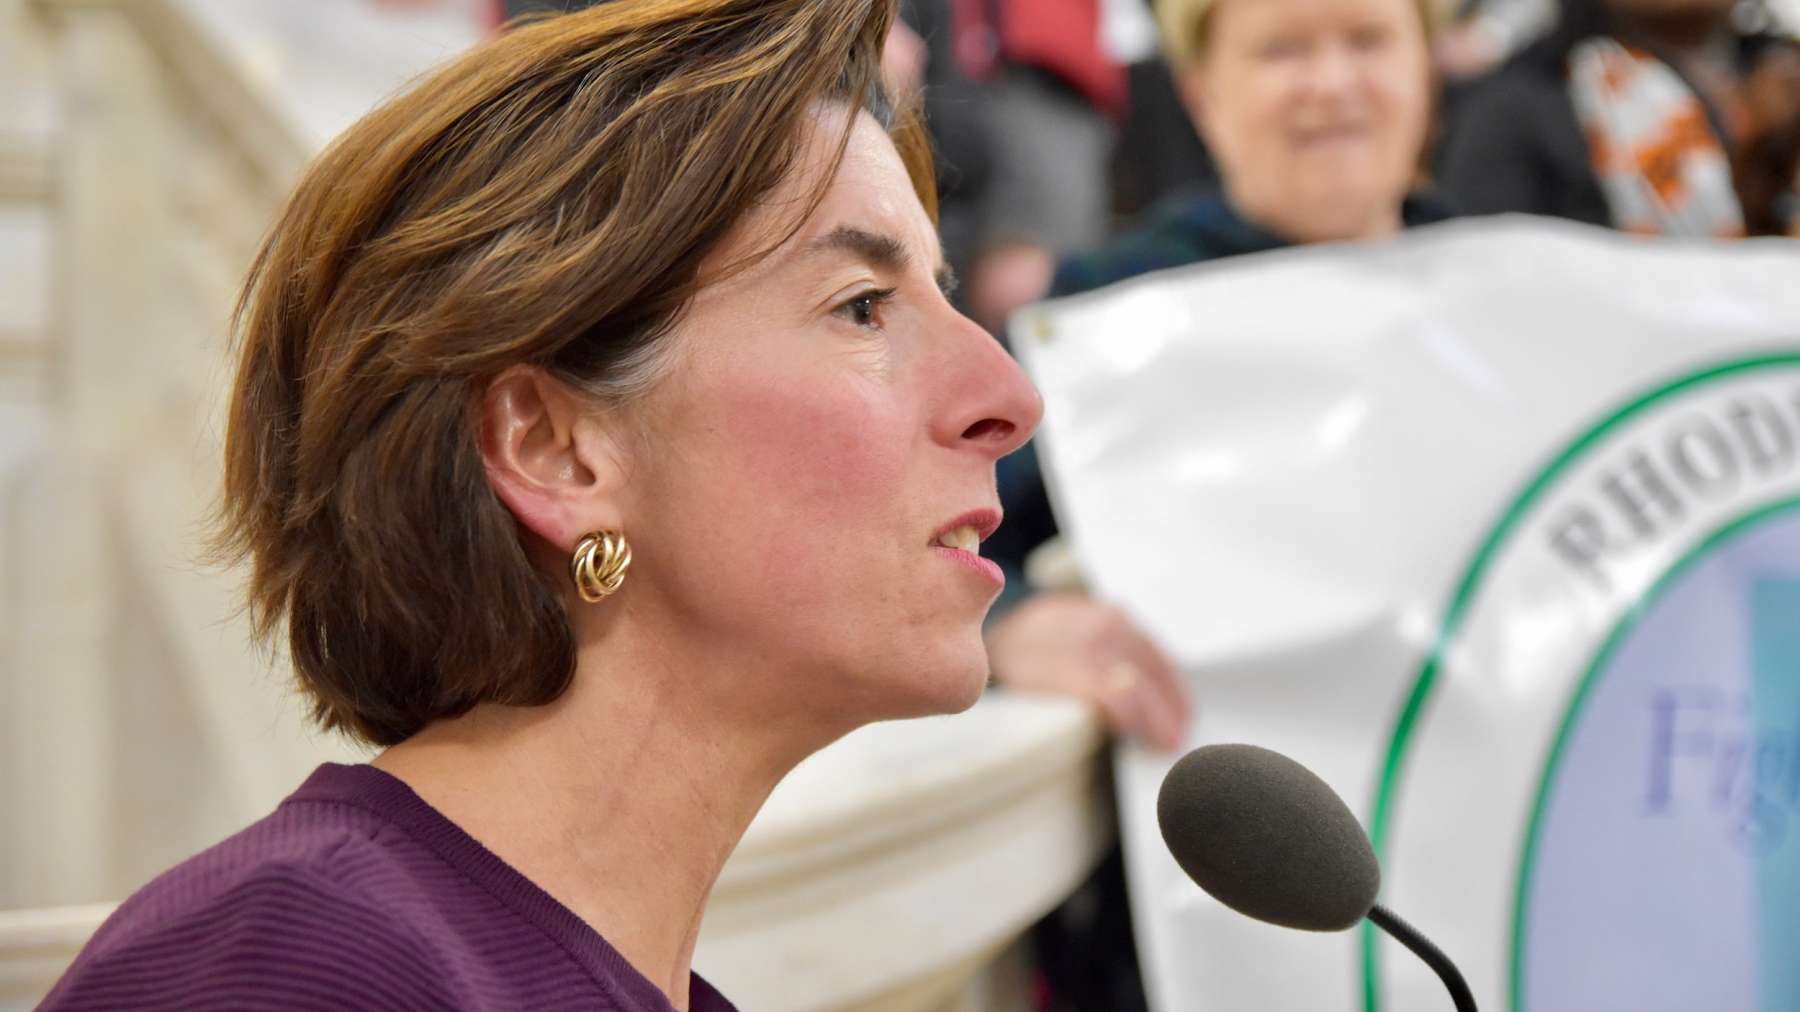 Will Governor Raimondo fight for the people or austerity in 2021 Budget?